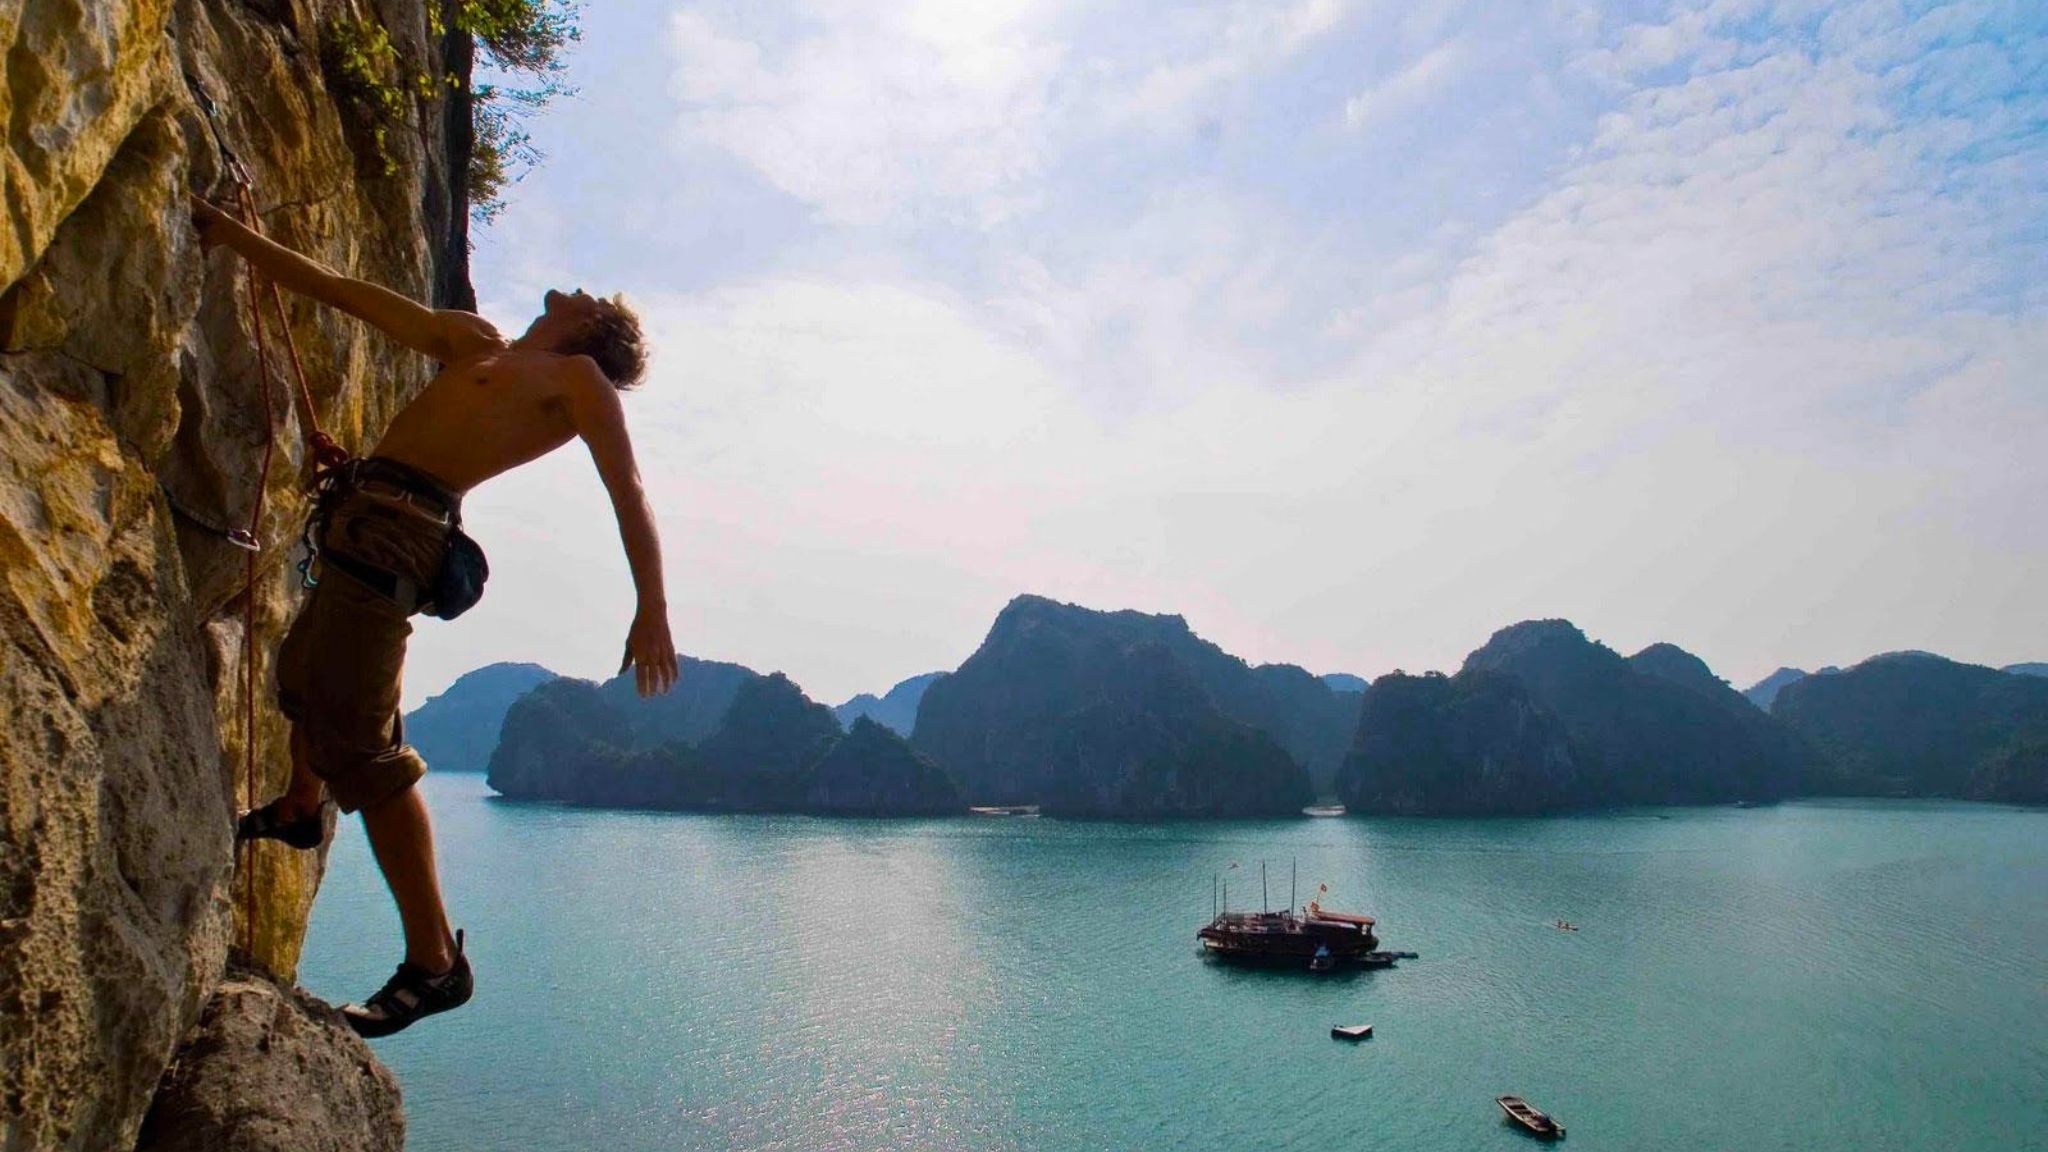 Challenge Your Health With The Cliffs Of Halong Bay